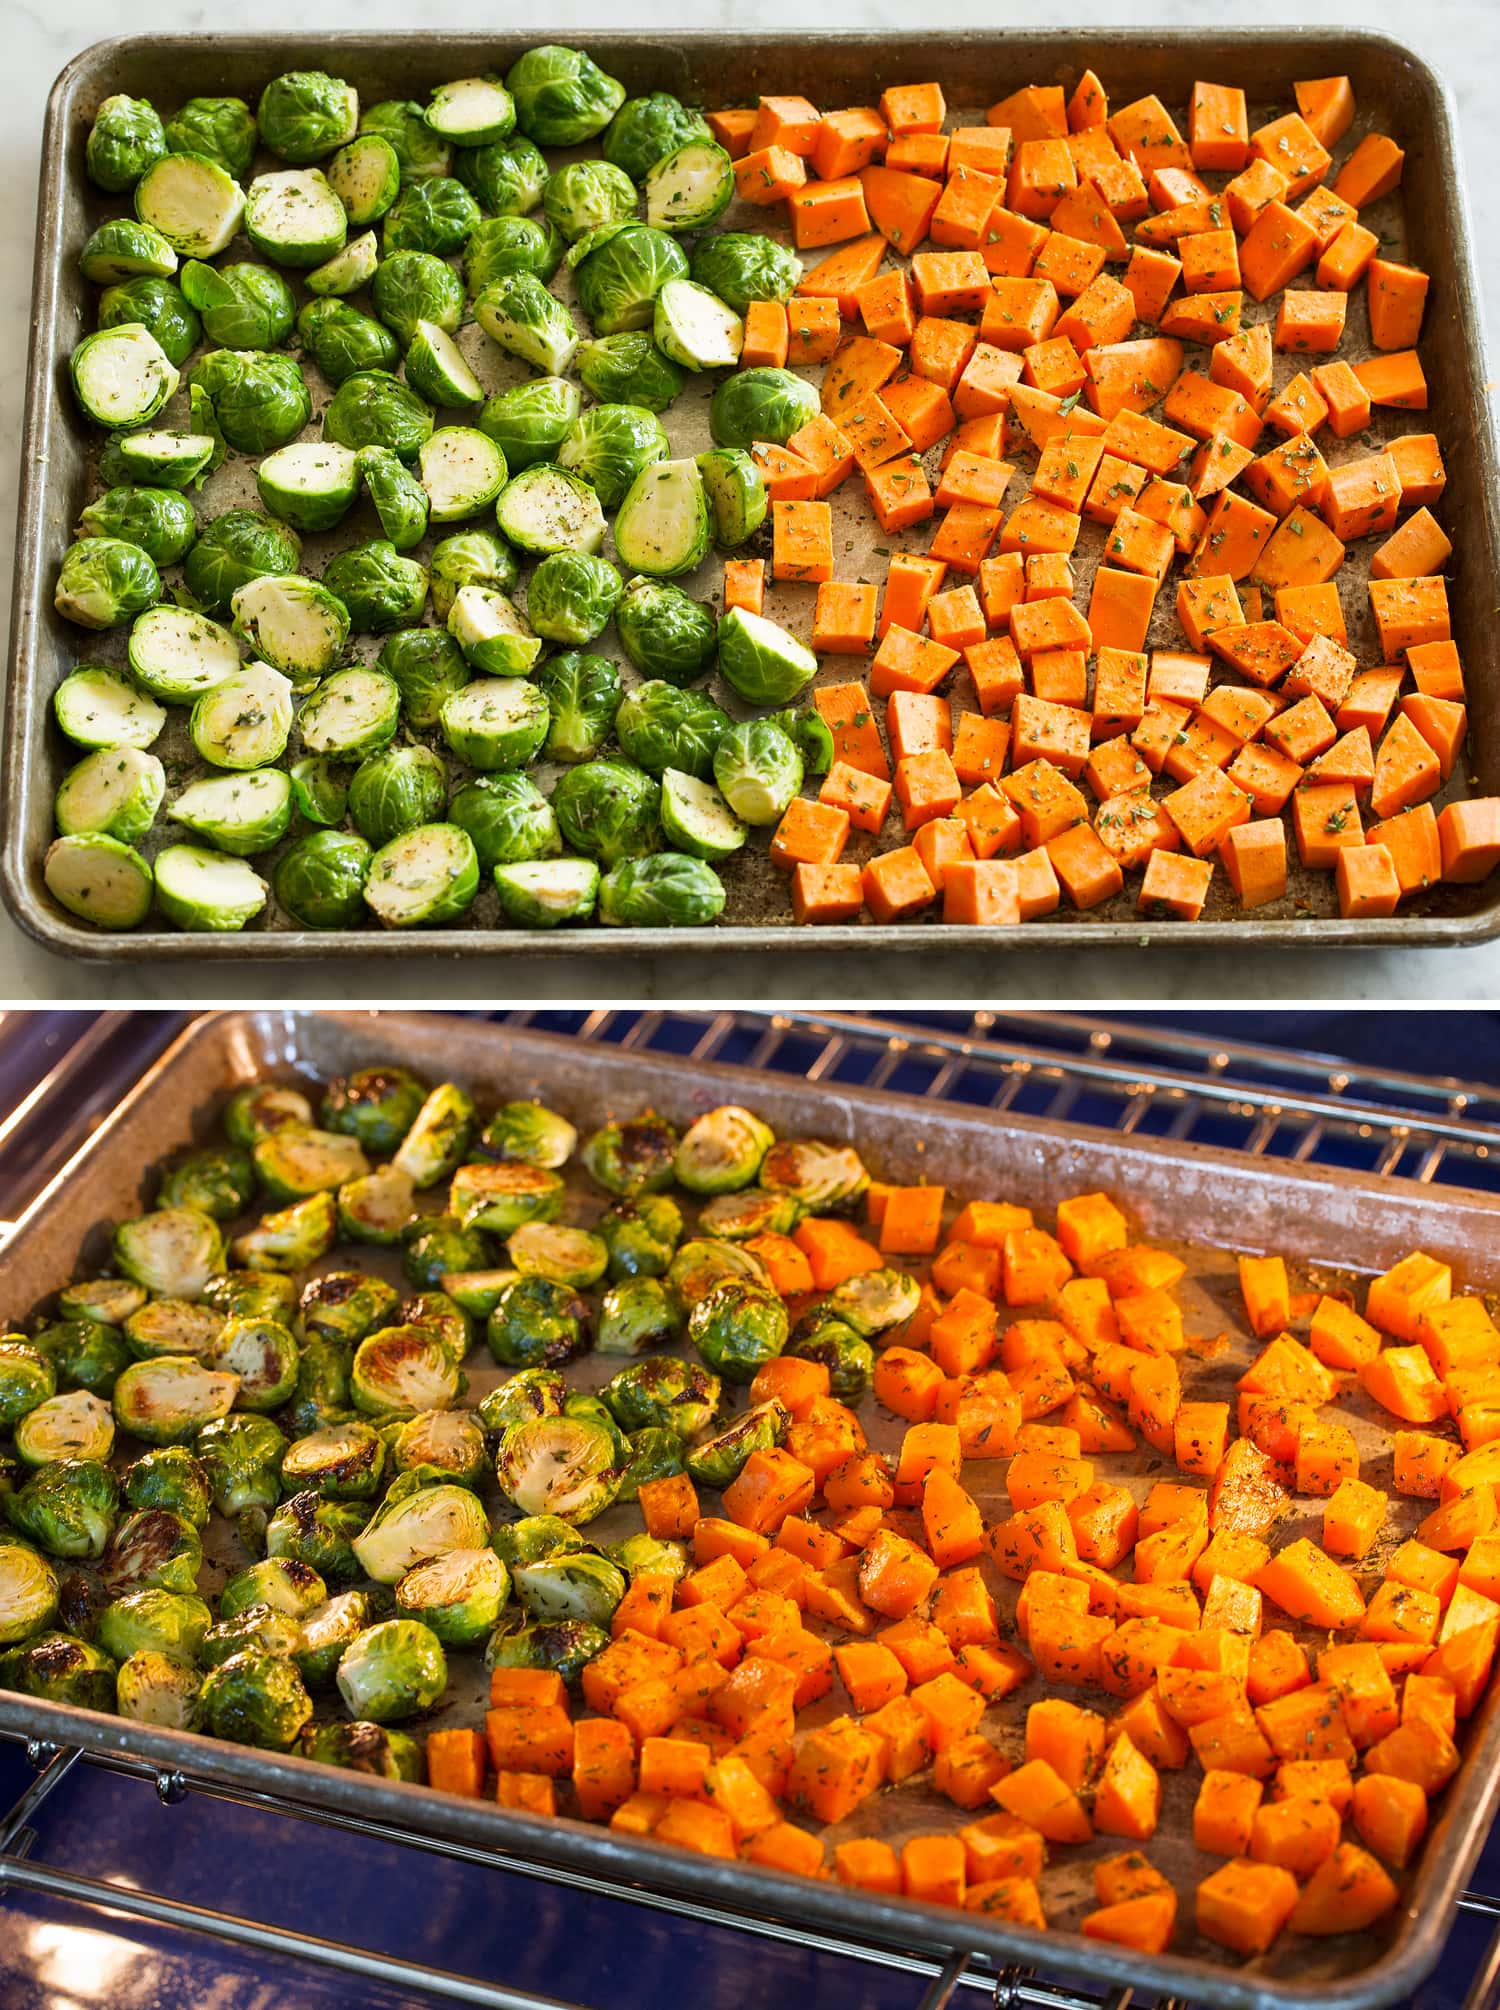 Roasting diced sweet potatoes and brussels sprouts halves.